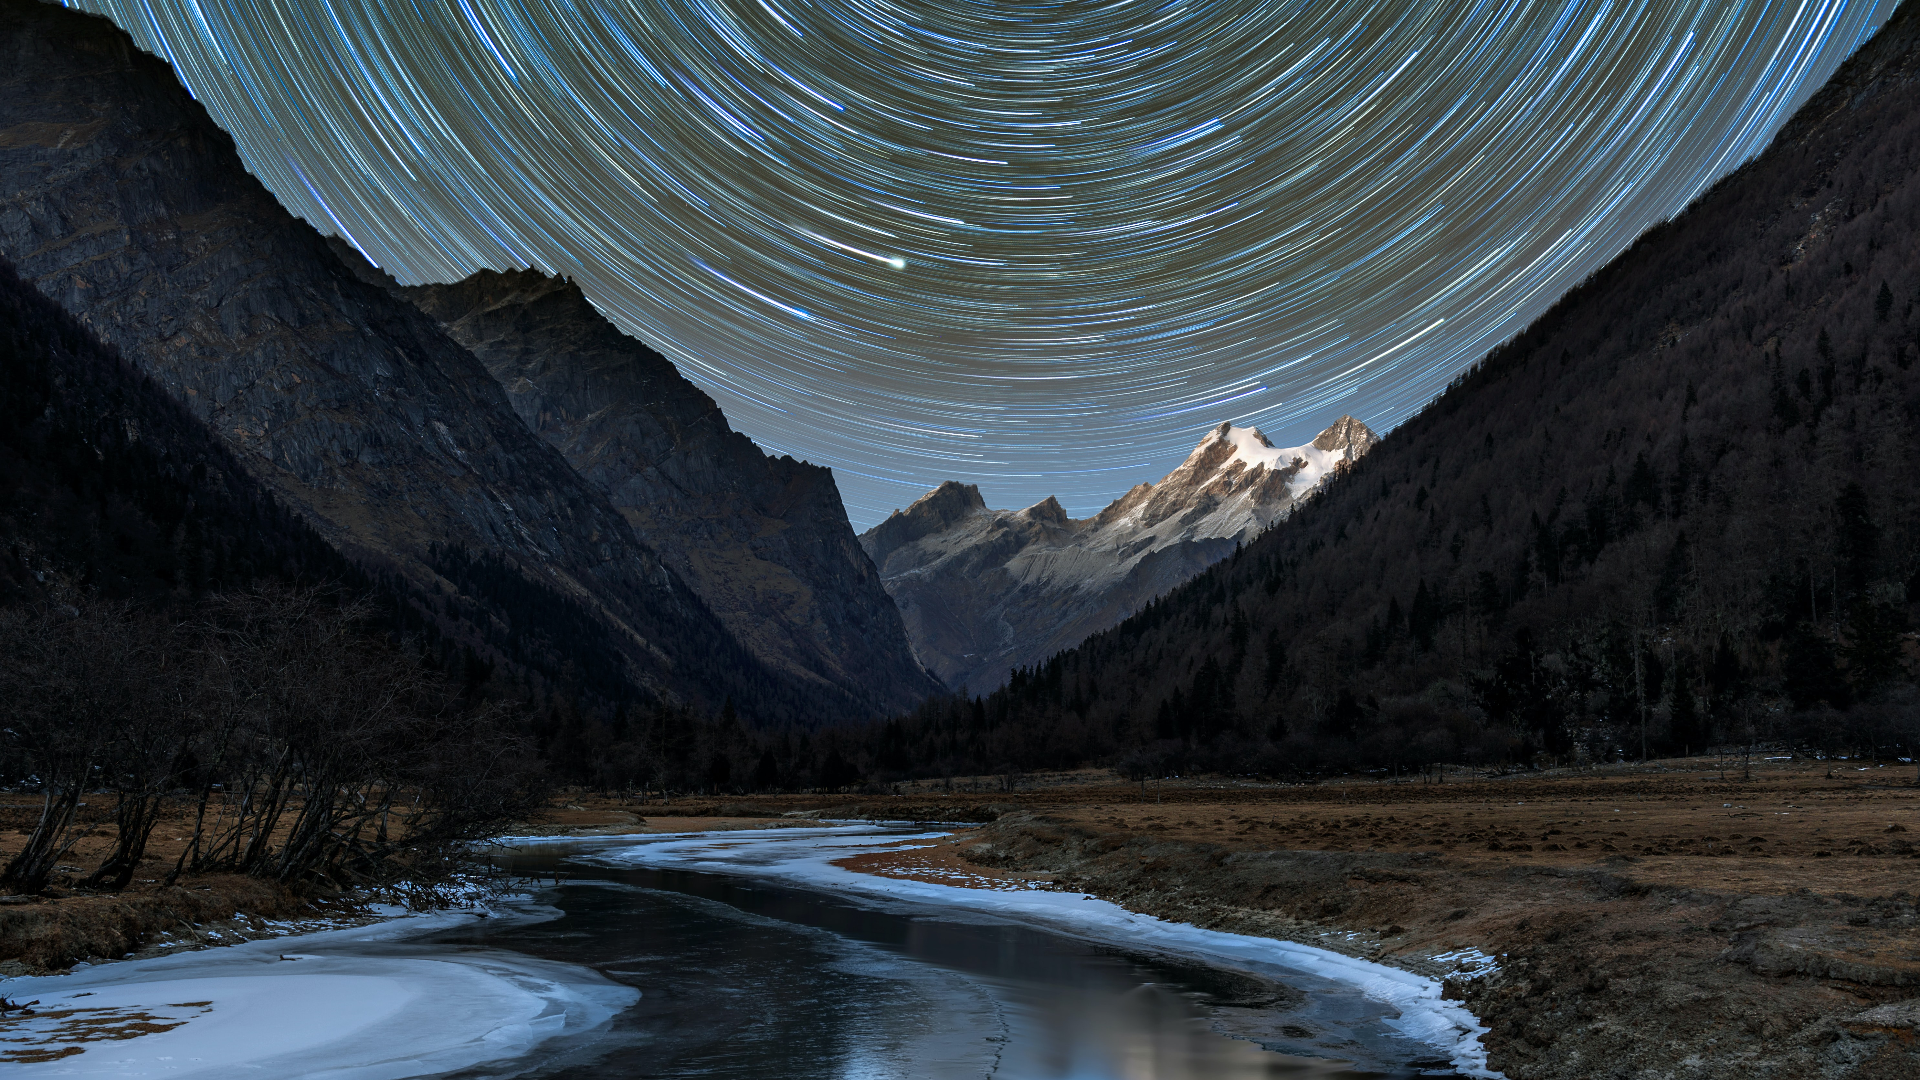 General 1920x1080 nature landscape mountains trees grass river rocks snowy peak sky stars long exposure Sichuan China